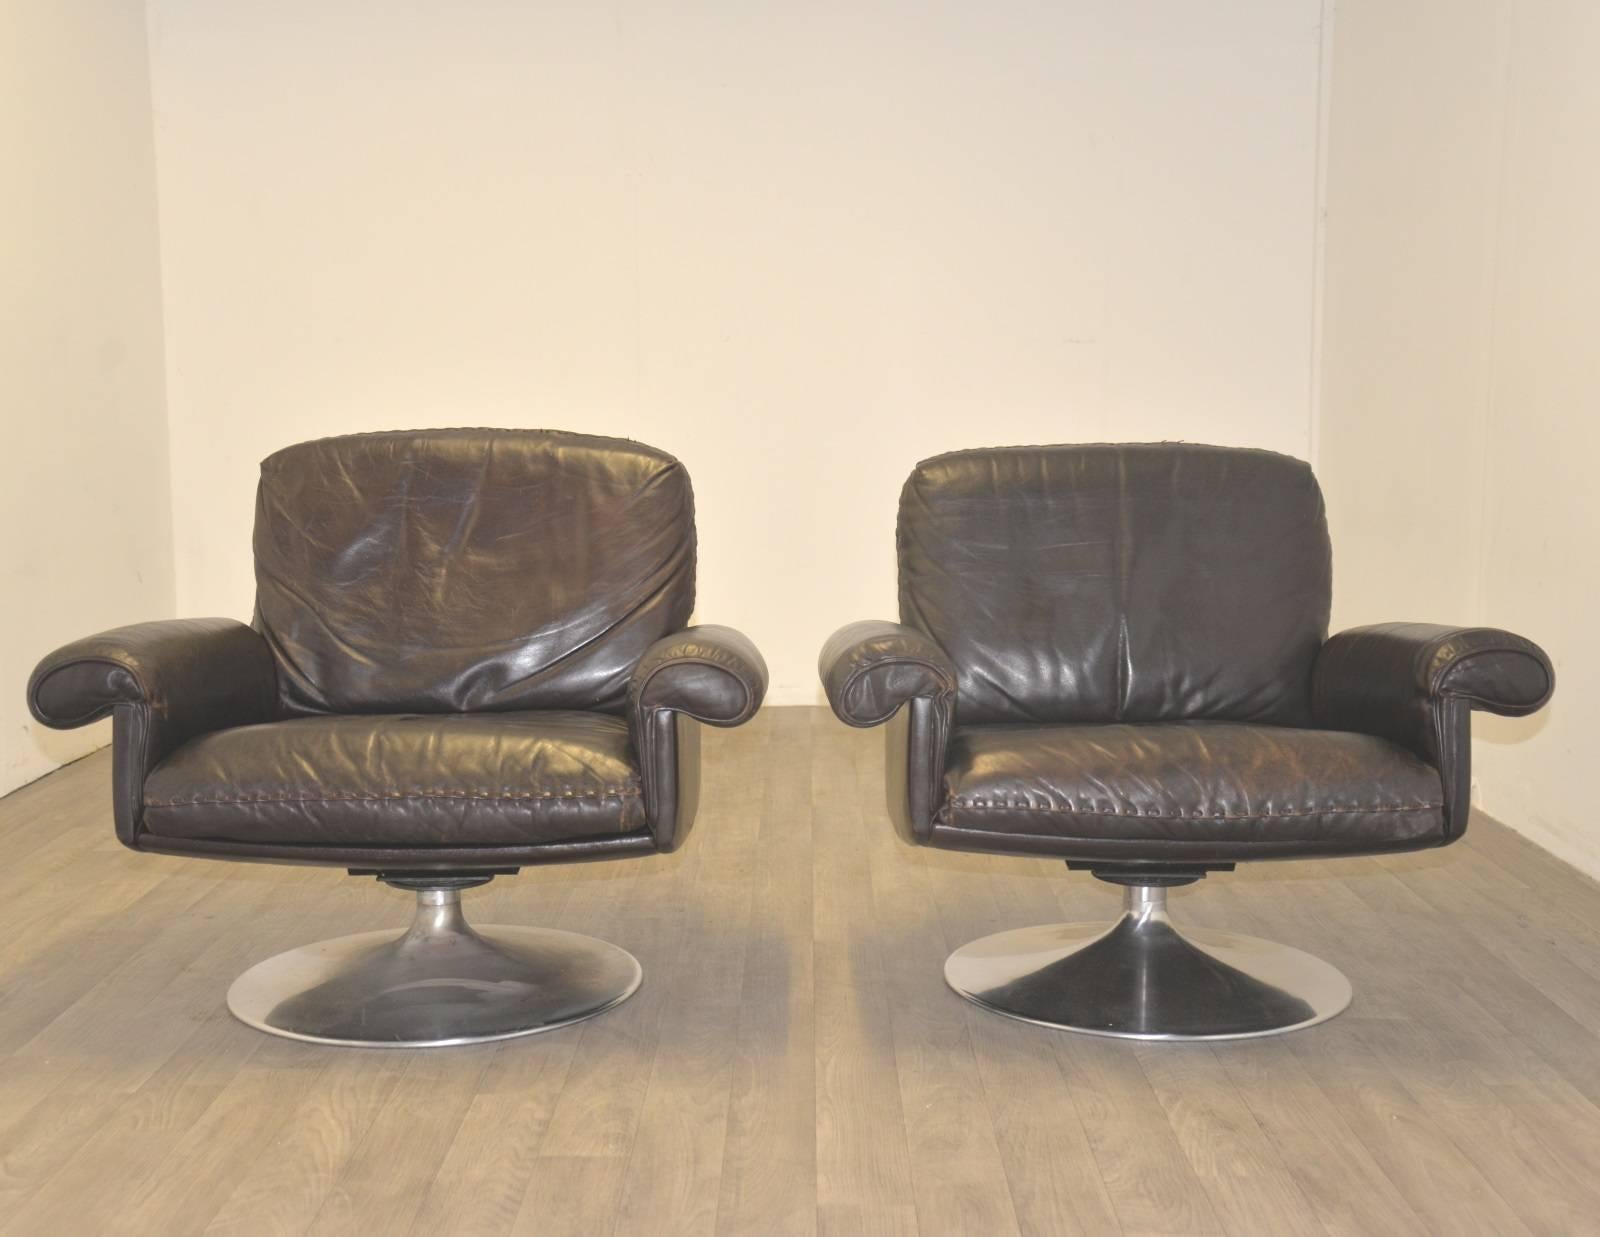 Competitive shipping rates for our US Continent and European customers.
Try before you buy service for our UK mainland customers.
Returns accepted.

A rare find, a pair of retro brown club armchairs standing on a circular swivel chrome-plated